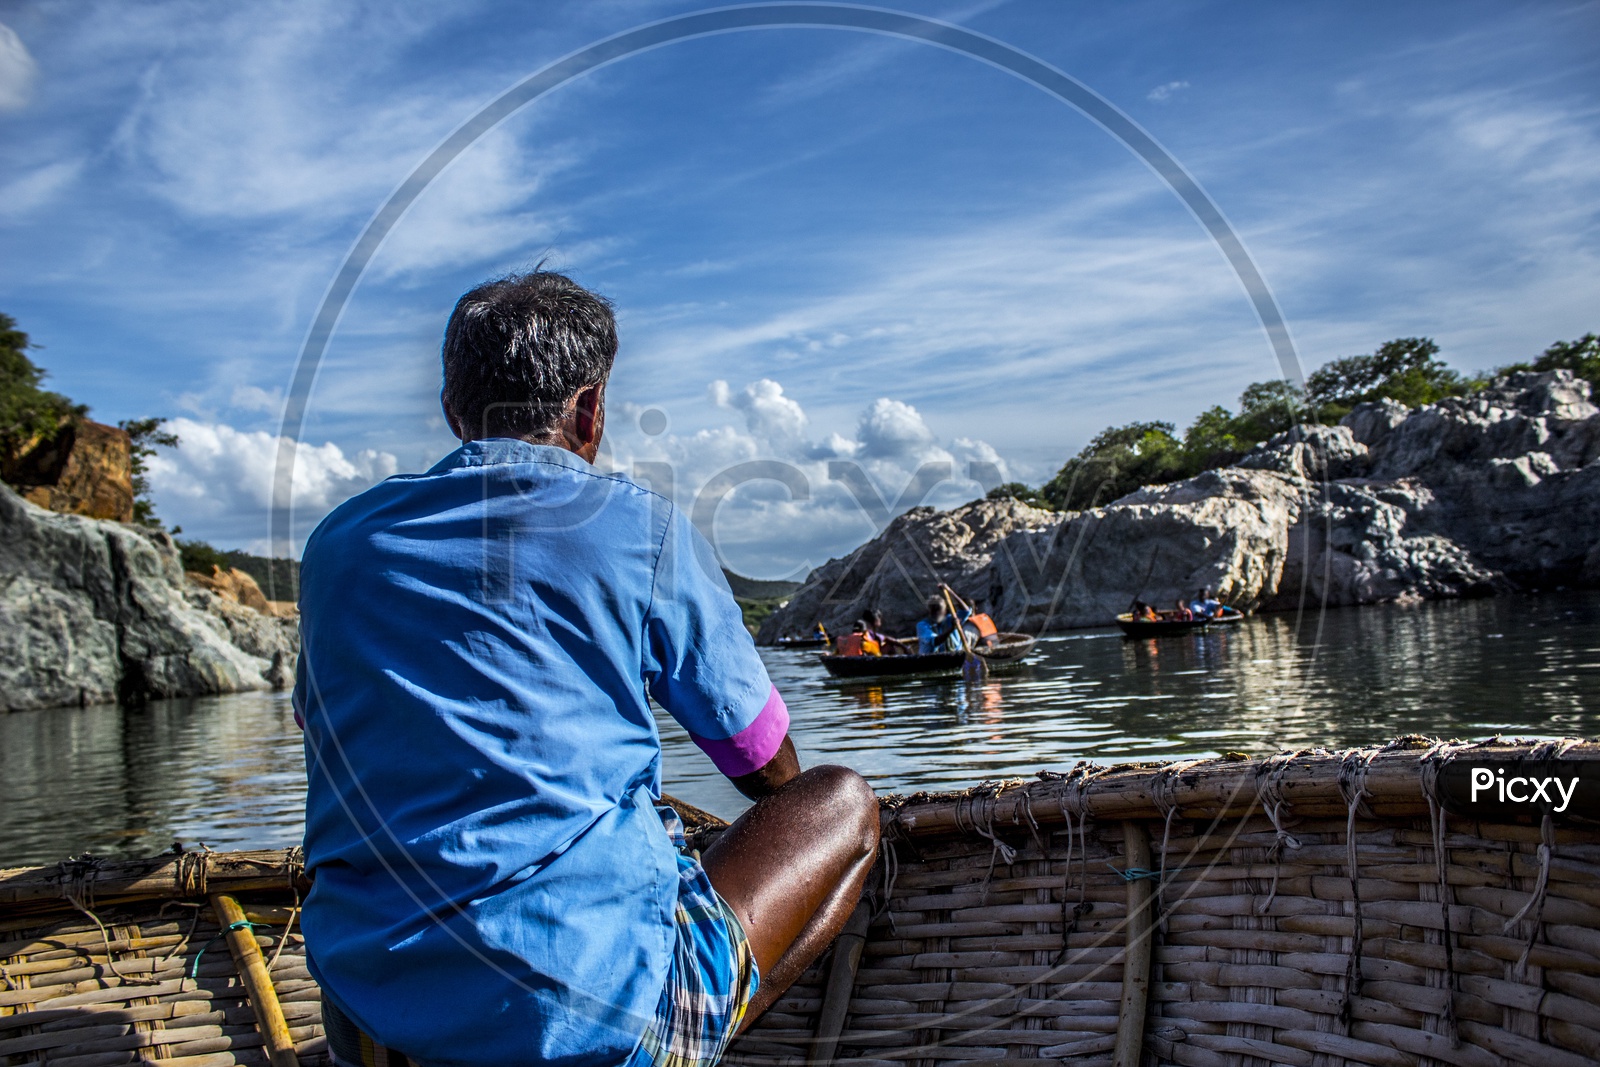 The Driver of the round boat in Hogenakkal  waterfall, Tamilnadu, India